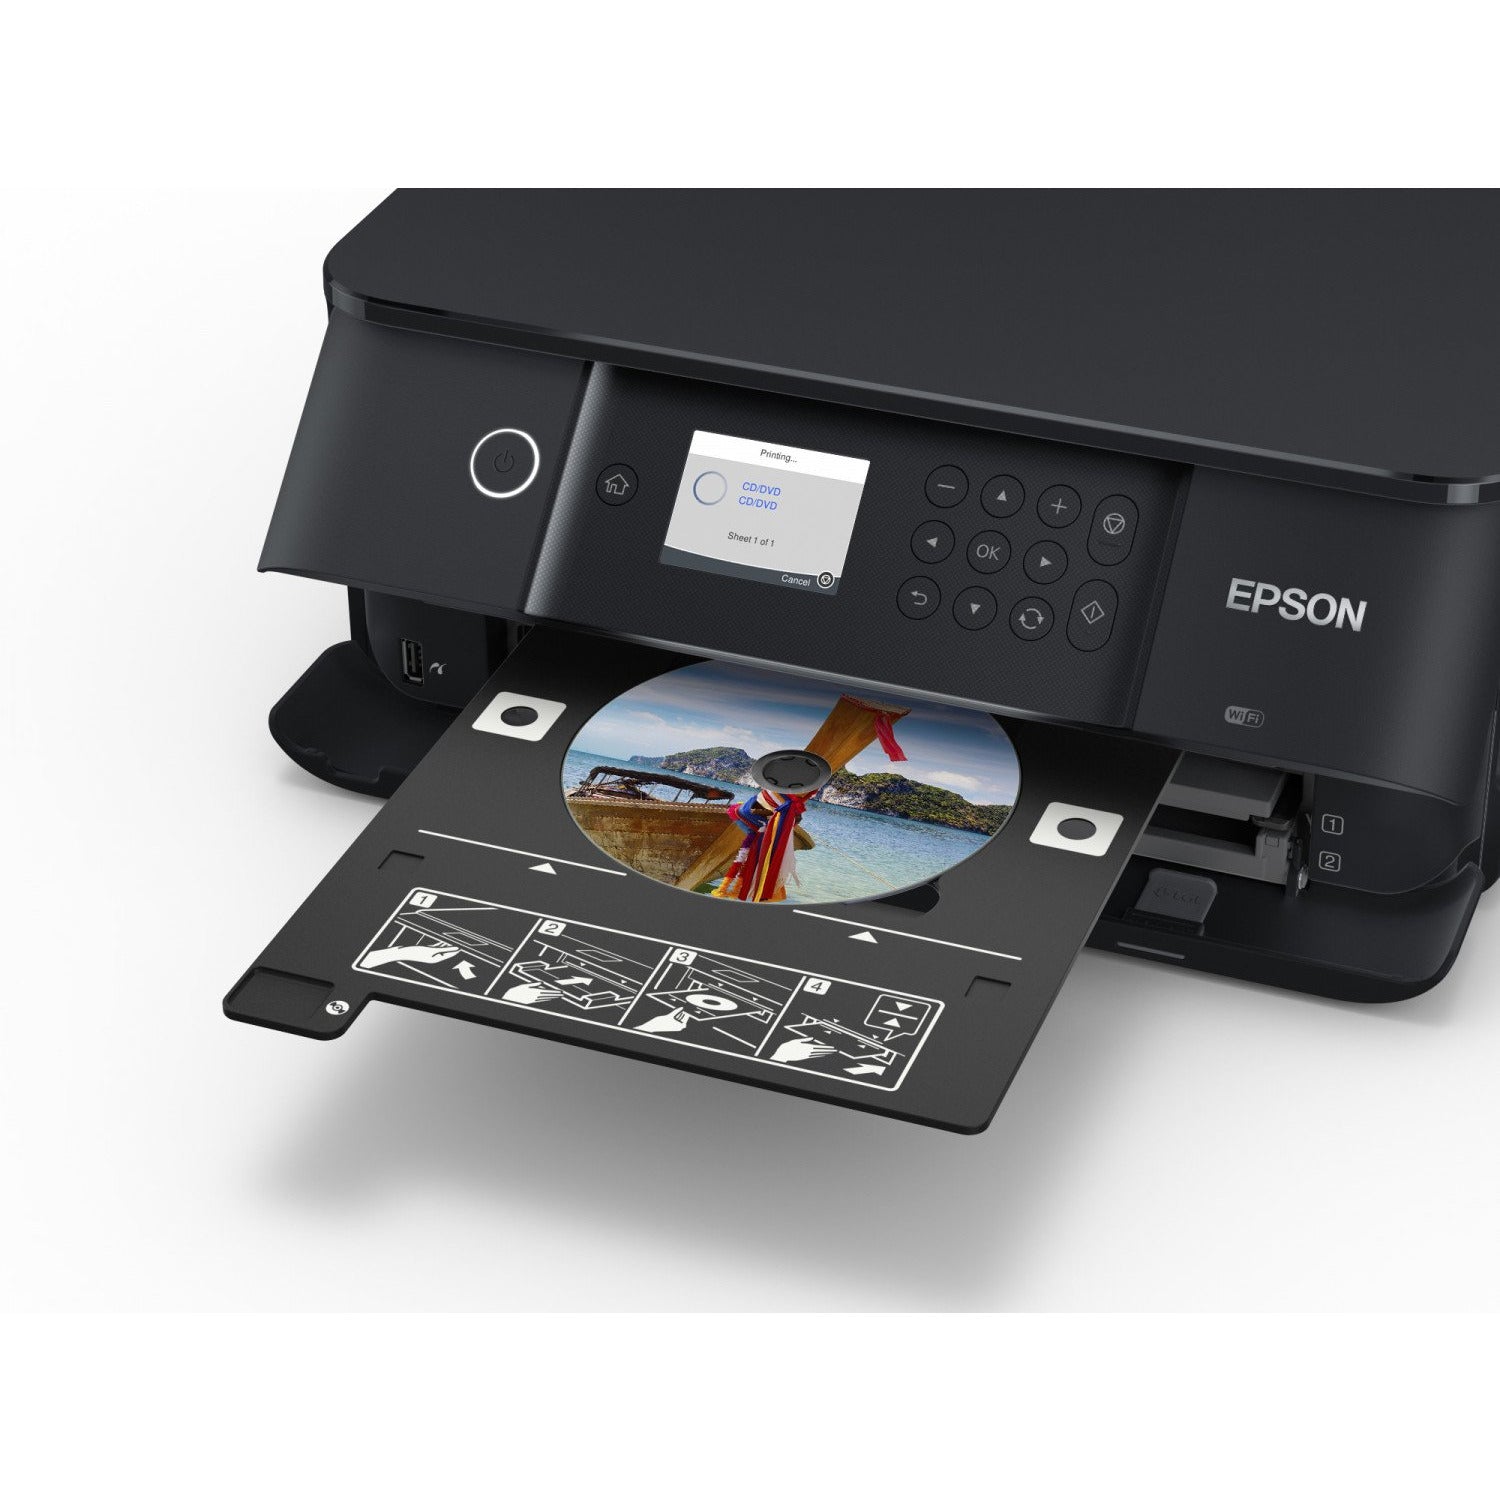 Epson XP-6100 All-in-one printer